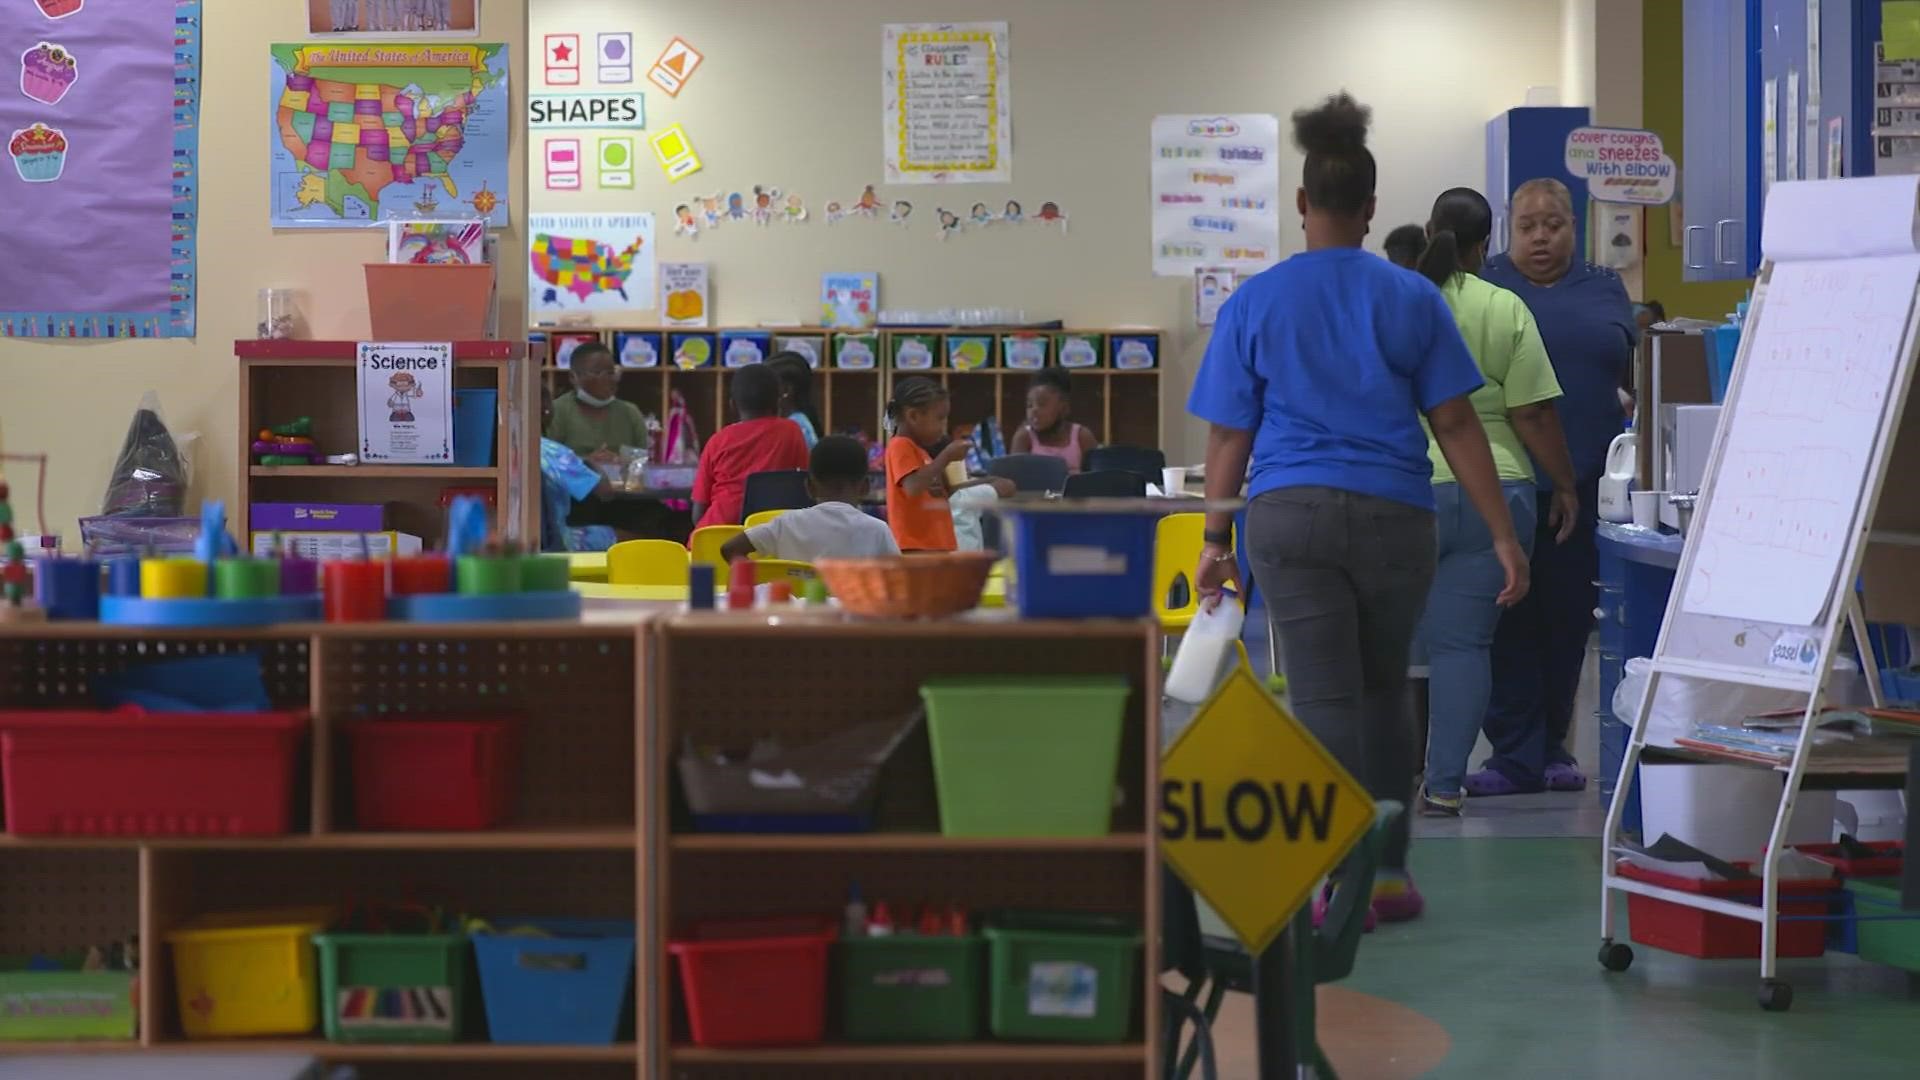 A survey says Arizonans typically spend 20% of their income on child-care.